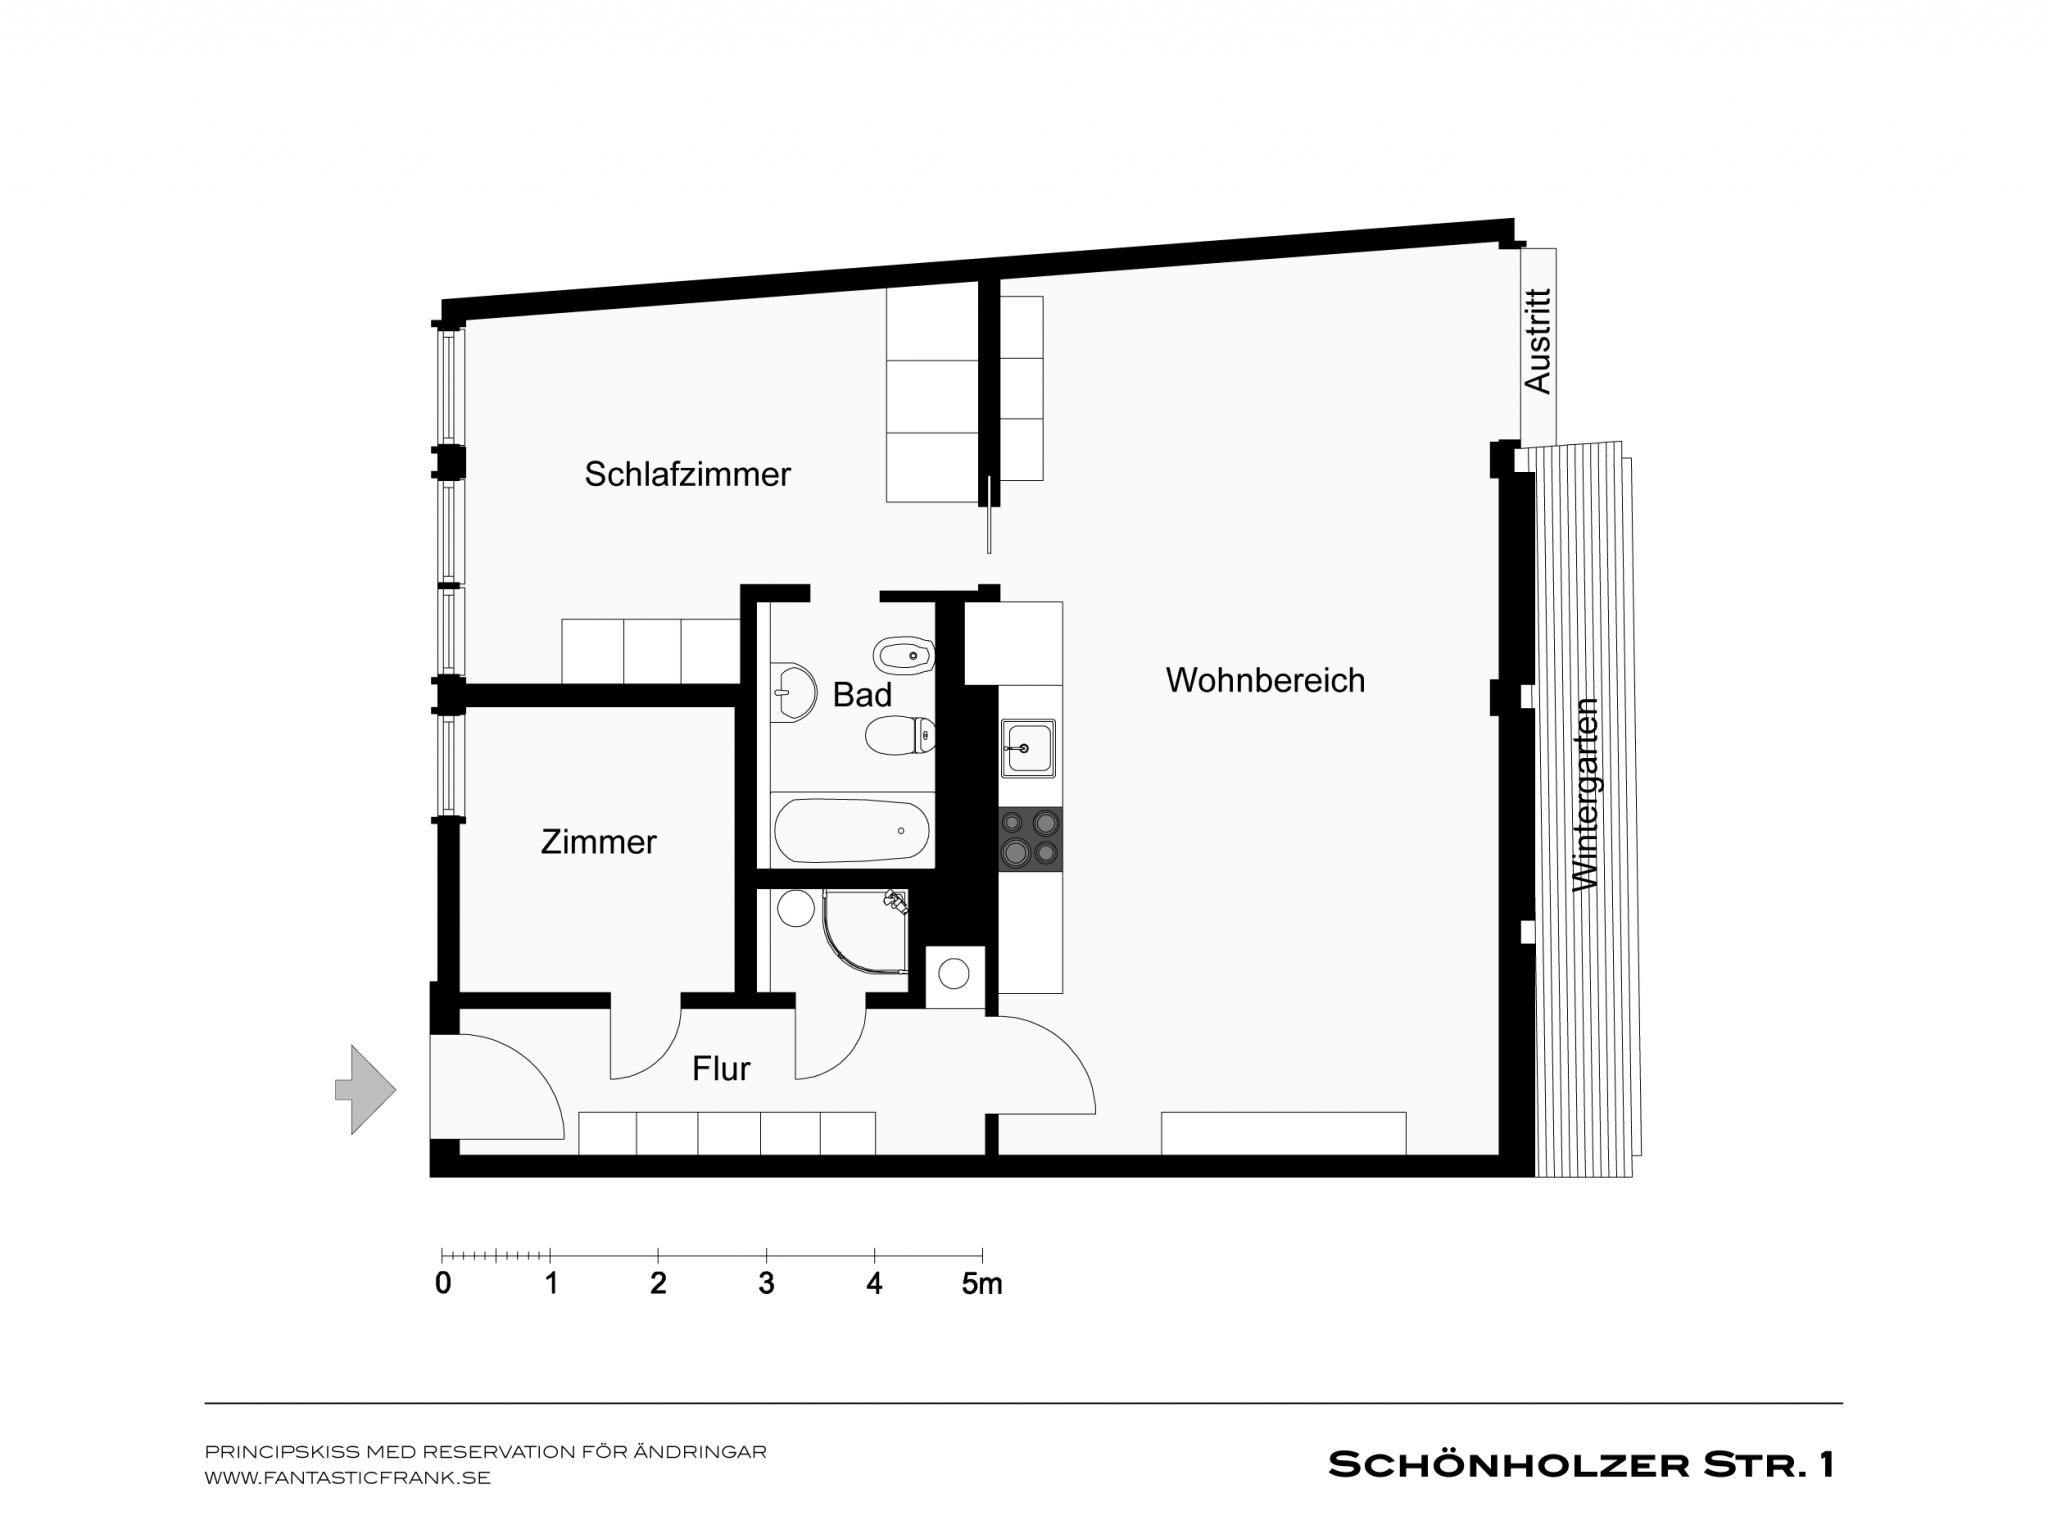 The image features a floor plan of a house, which is a two-story home with a basement. The floor plan is divided into two sections, with the first section being the main living area and the second section being the bedroom. The living area is located on the first floor, while the bedroom is situated on the second floor.

The floor plan also includes a kitchen area, which is located on the second floor. The kitchen is described as a small room with a sink and a refrigerator. The living room and bedroom are connected by a hallway, which is also visible in the image.